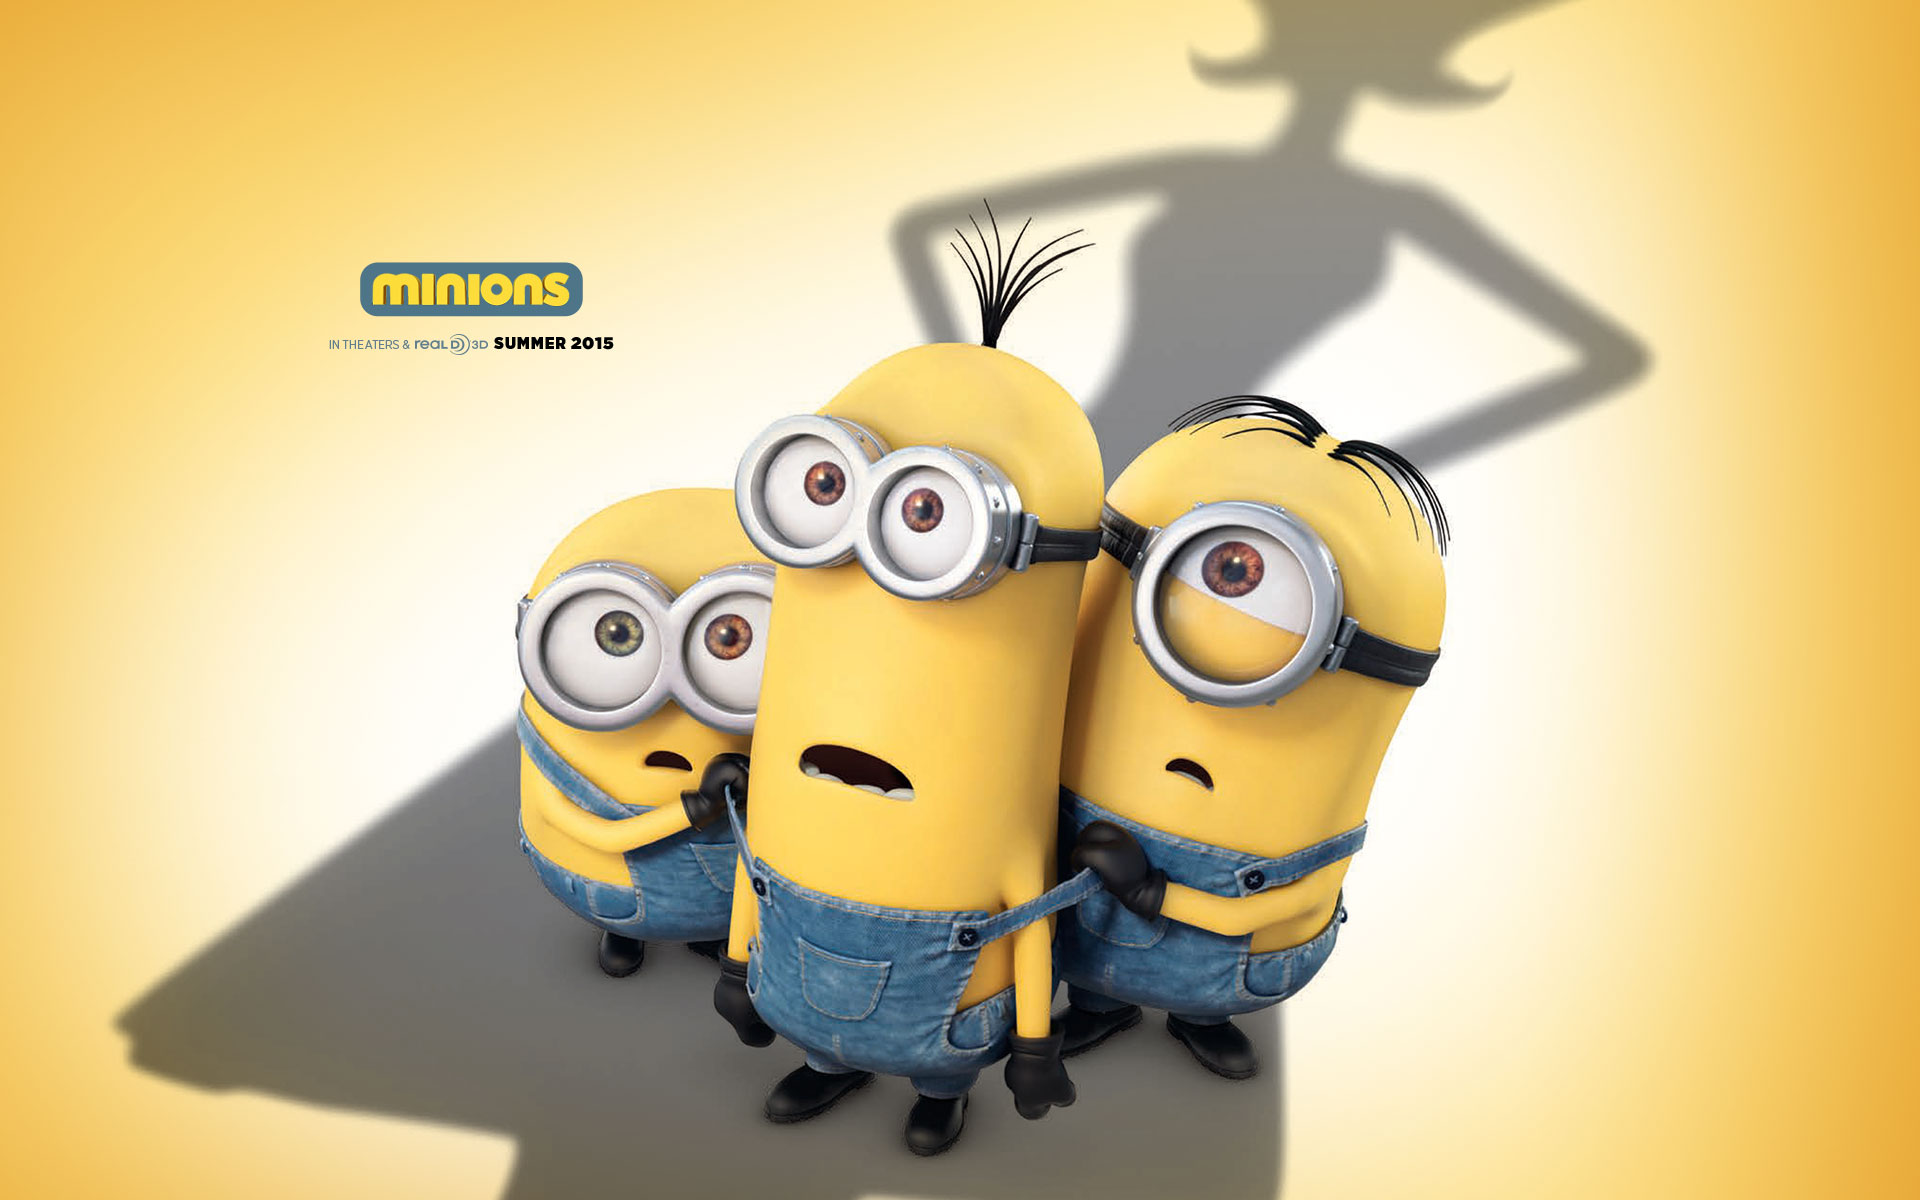 a cute collection of minions movie 2015 desktop backgrounds iphone wallpapers minions movie 2015 desktop backgrounds